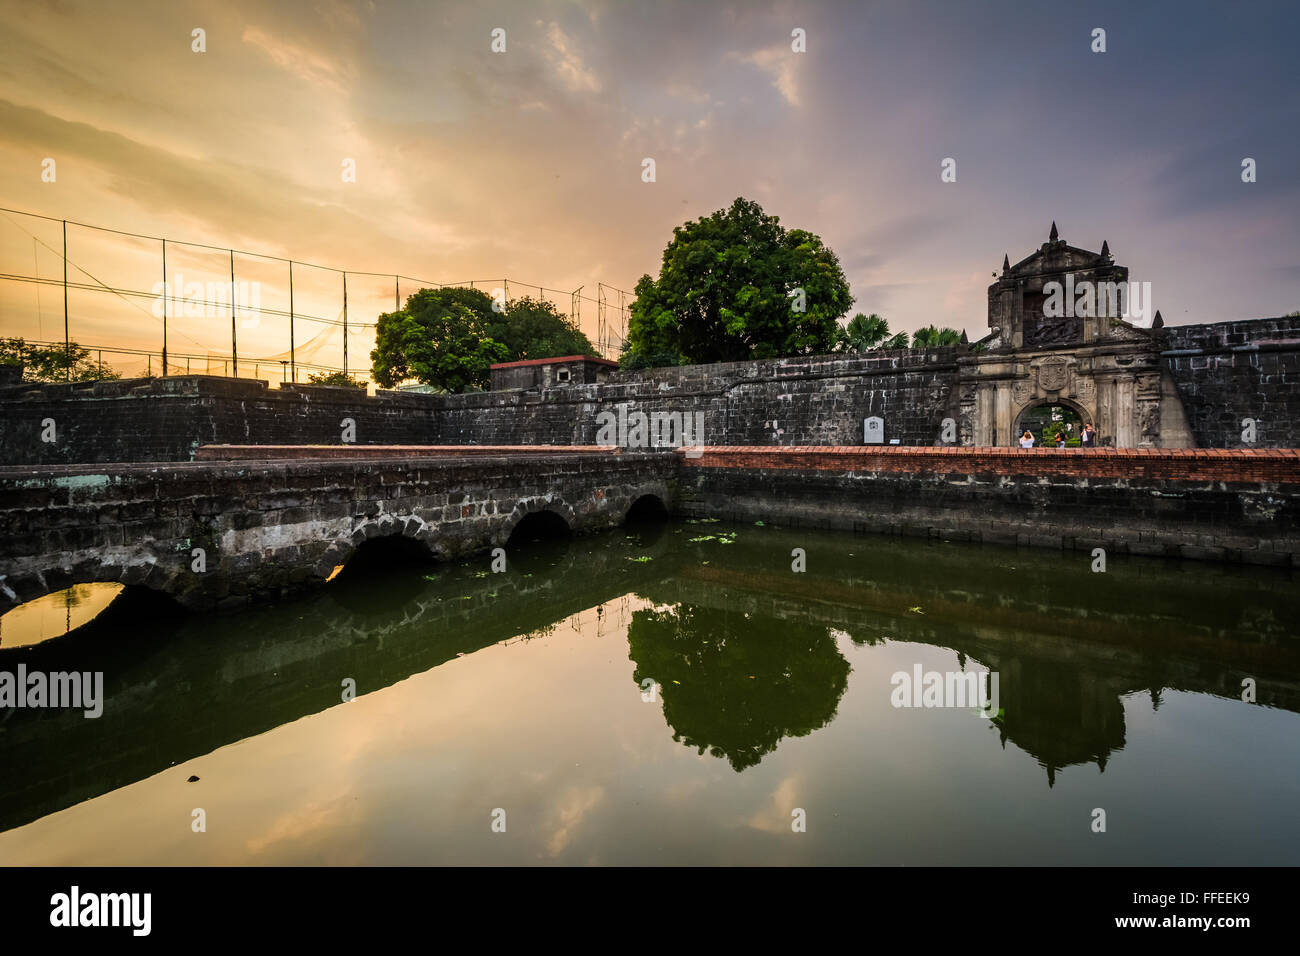 The moat at Fort Santiago at sunset, in Intramuros, Manila, The Philippines. Stock Photo